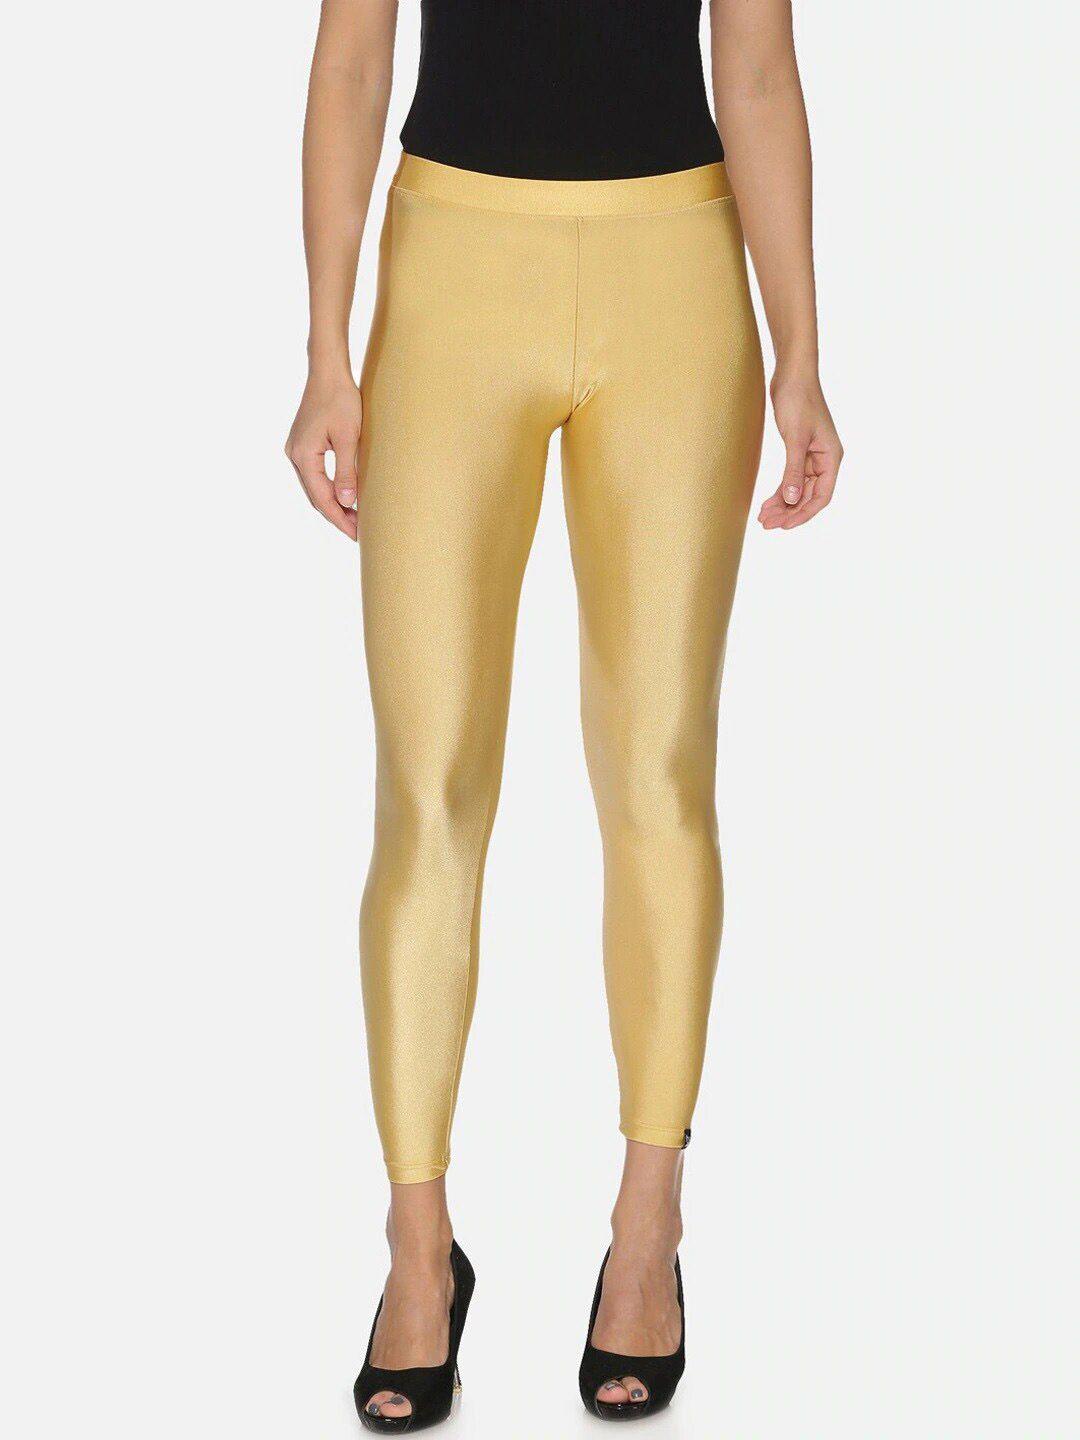 twin birds women gold-colored solid ankle-length leggings